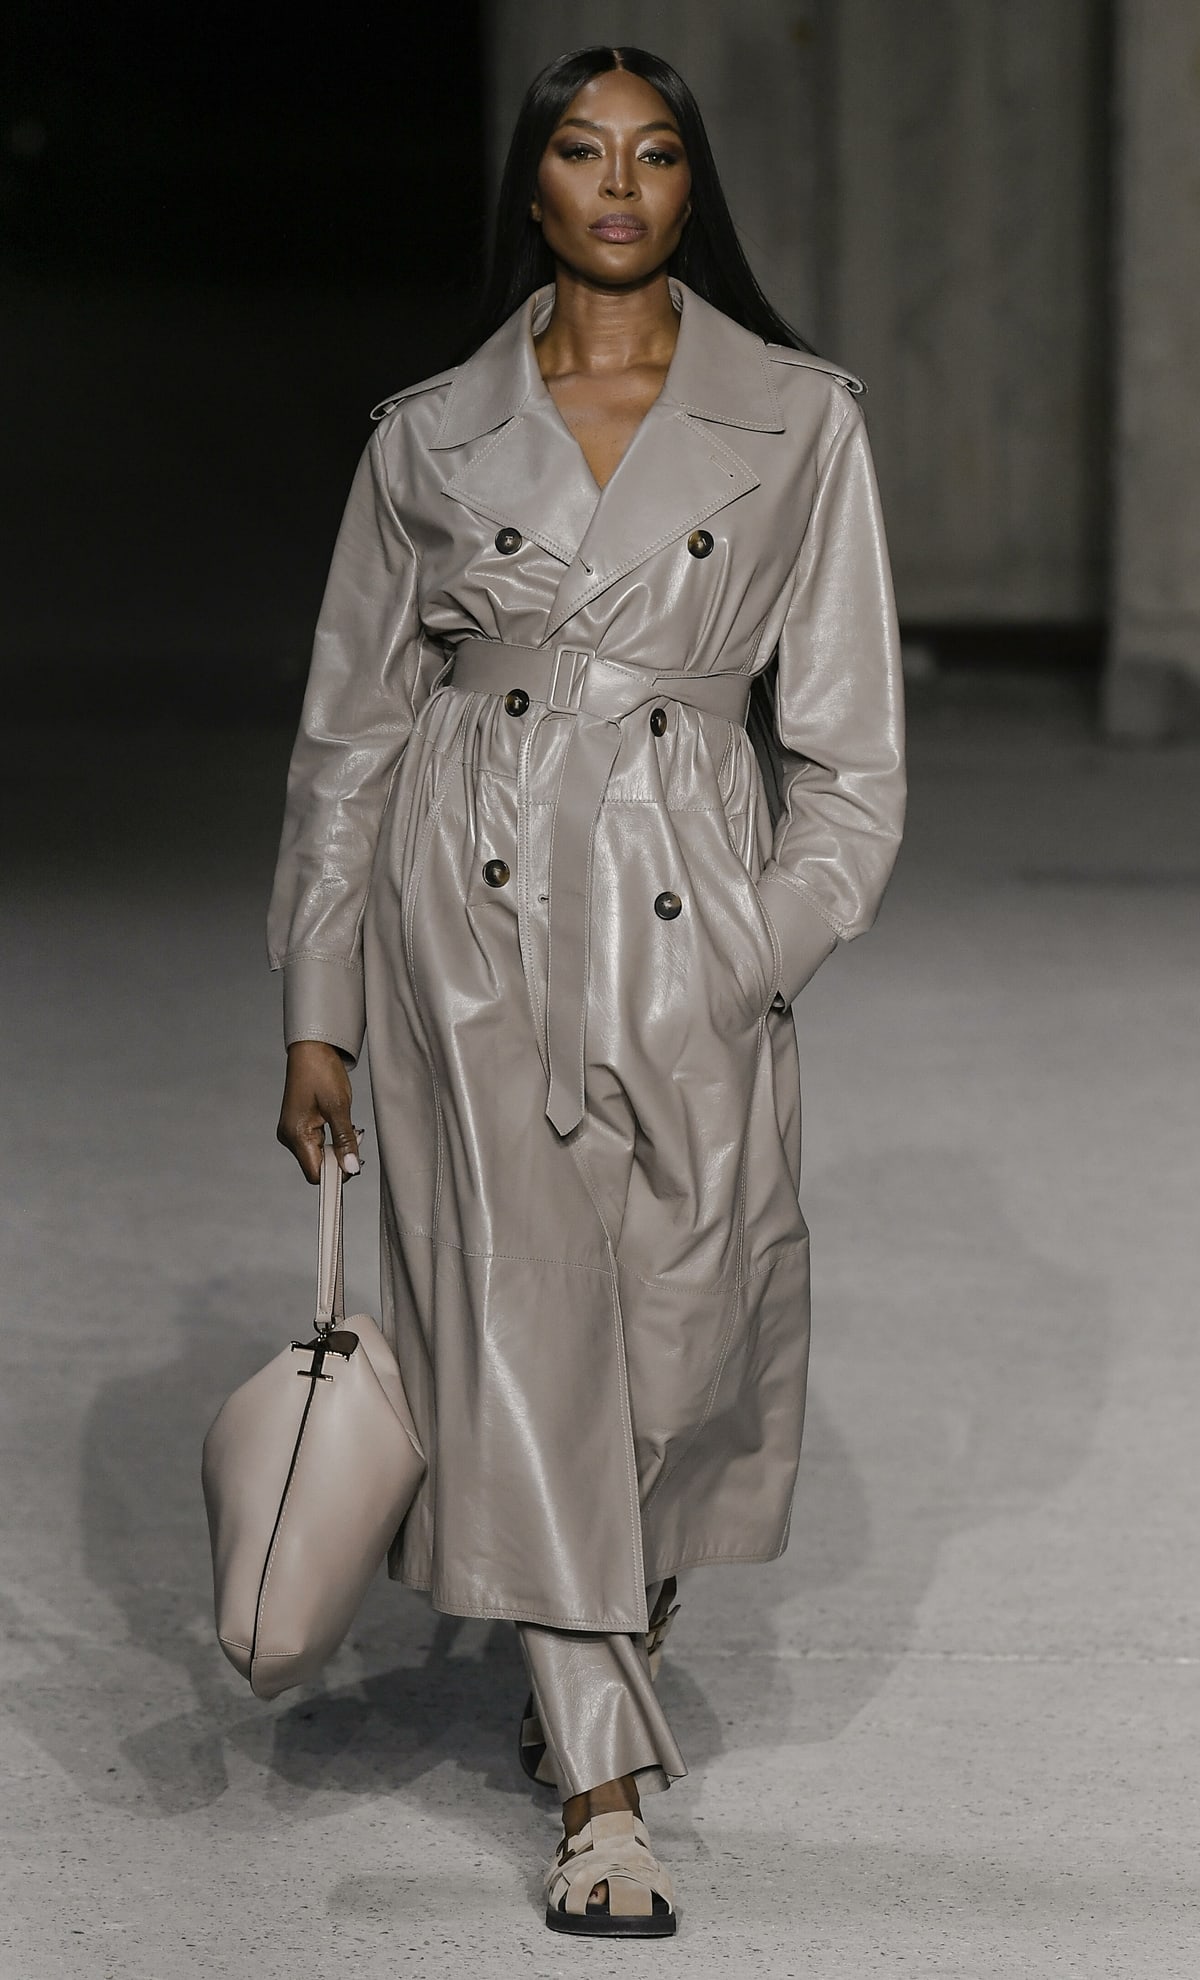 Naomi Campbell walks the runway during Tod's Ready to Wear Spring/Summer 2023 fashion show